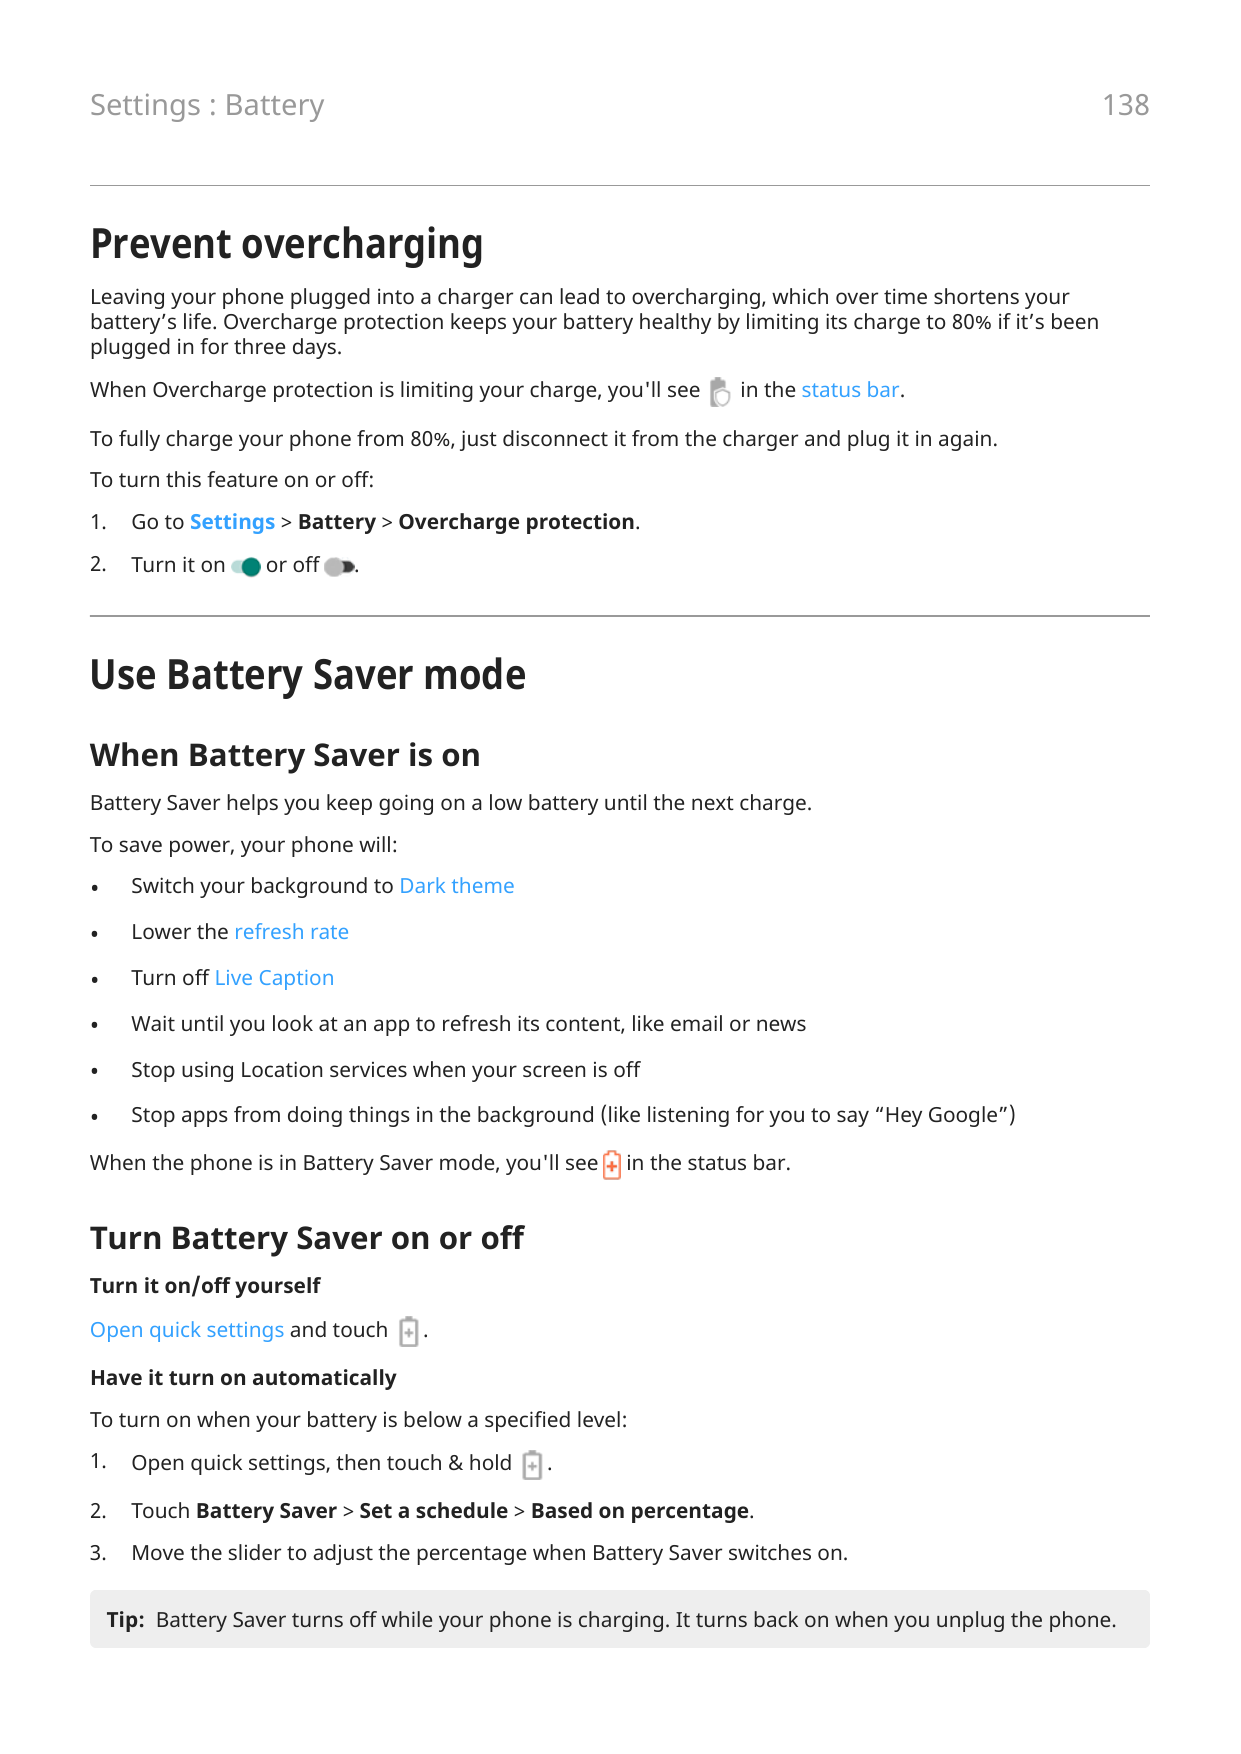 138Settings : BatteryPrevent overchargingLeaving your phone plugged into a charger can lead to overcharging, which over time sho